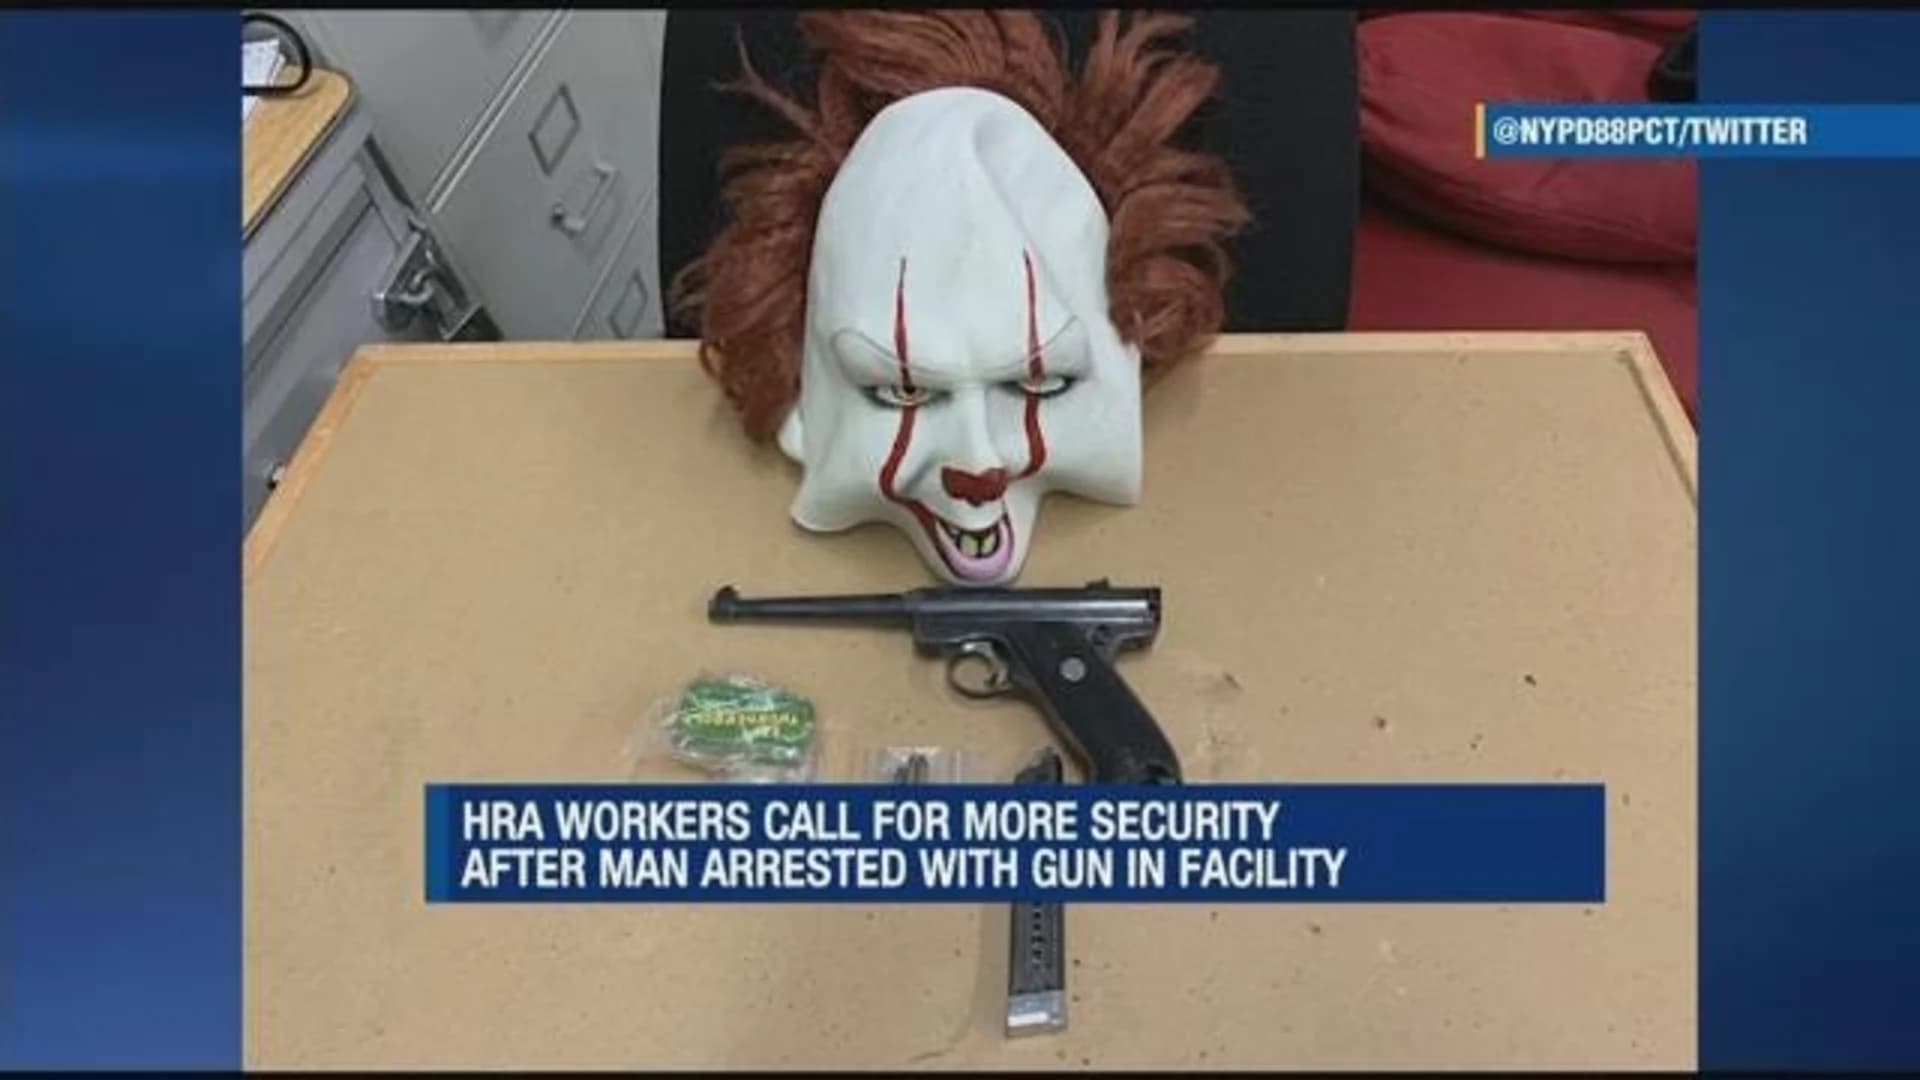 City workers seek more security after man is found with clown mask, gun in building